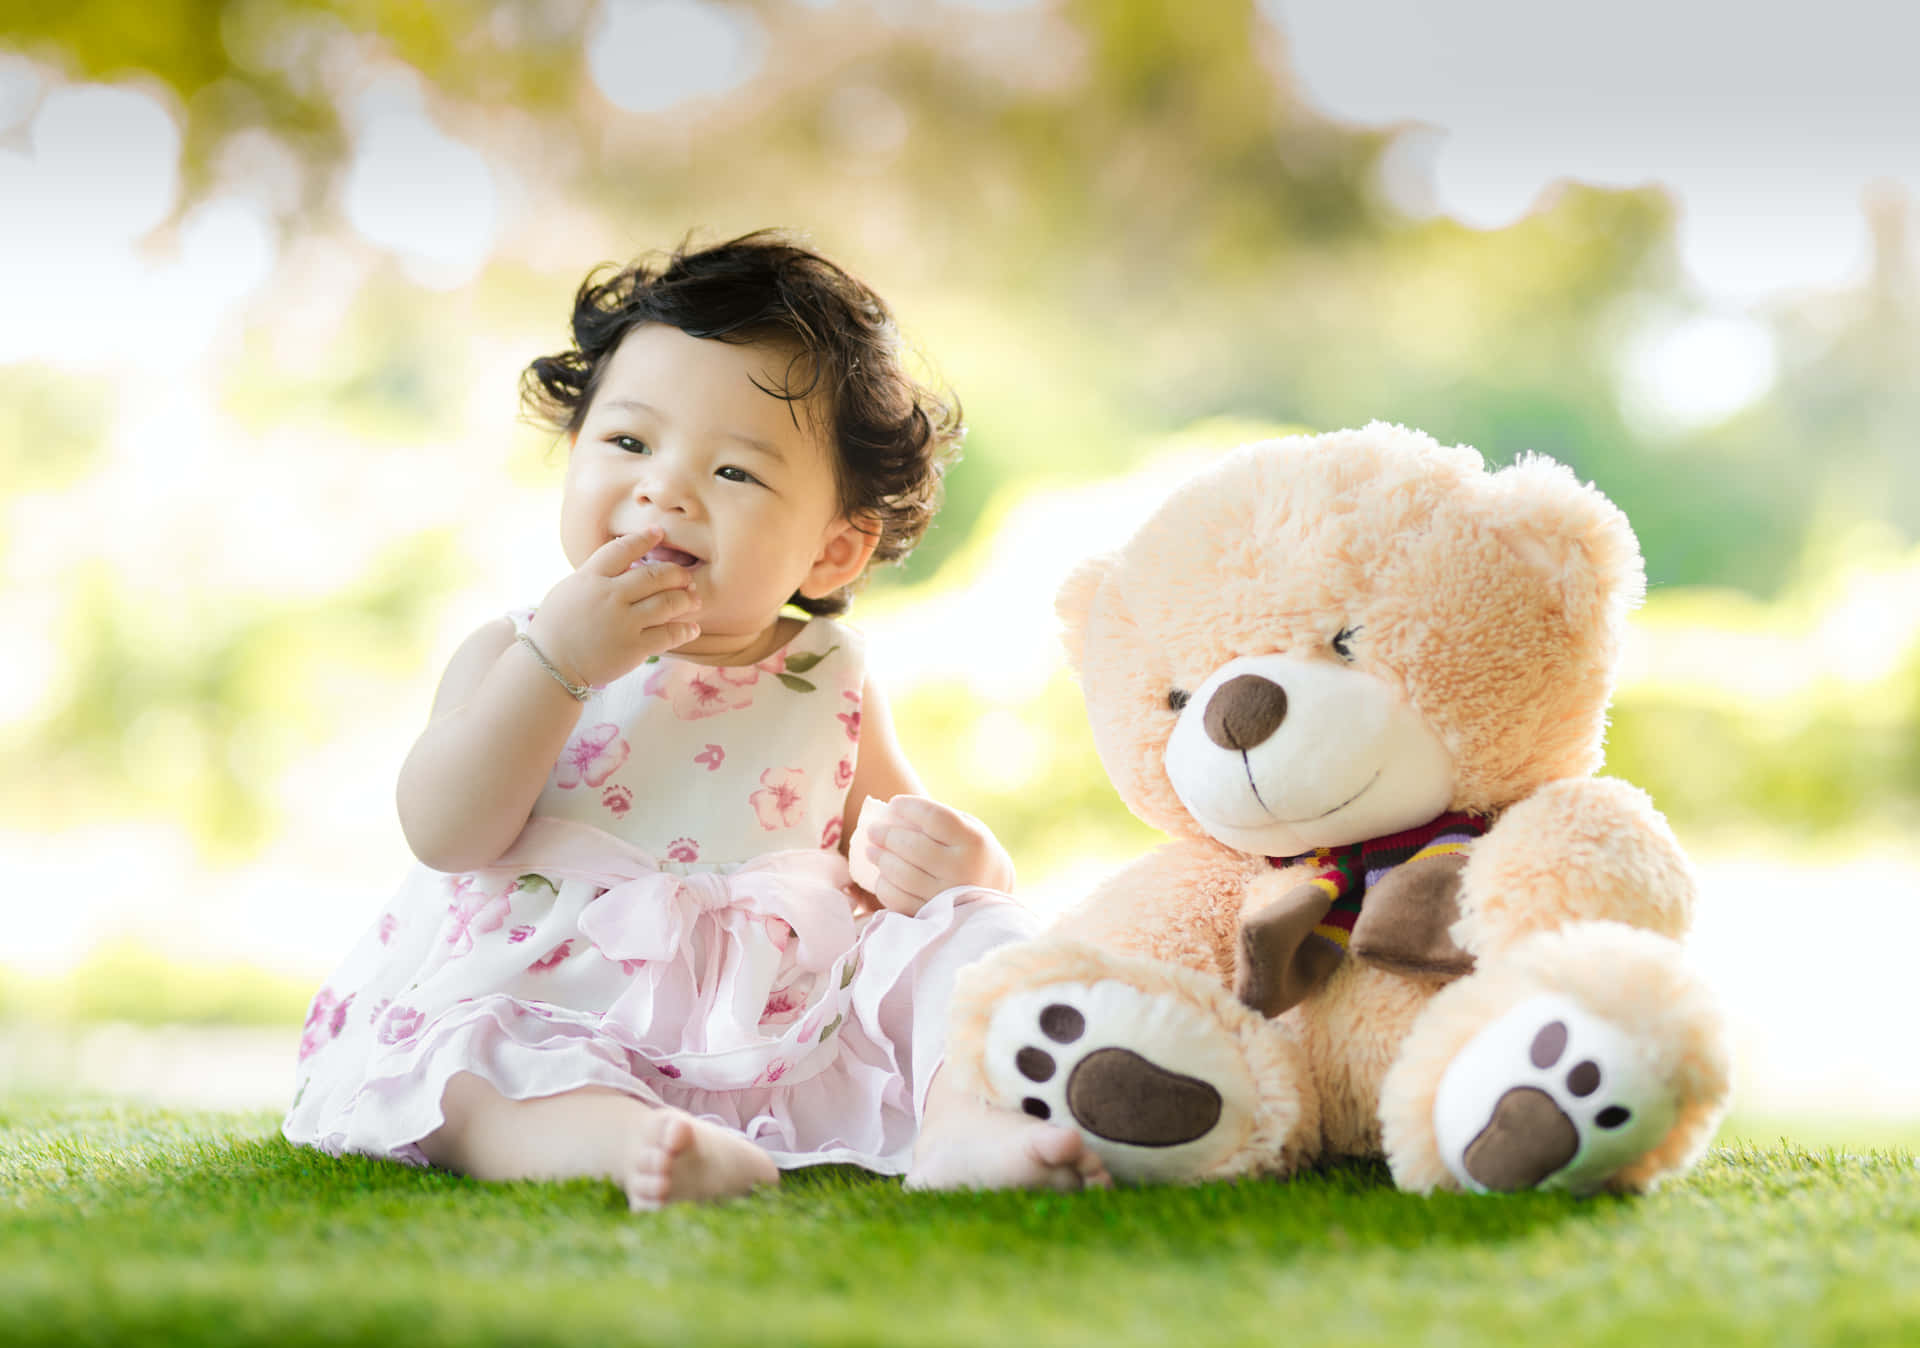 Adorable baby girl in white dress surrounded by soft toys and flowers